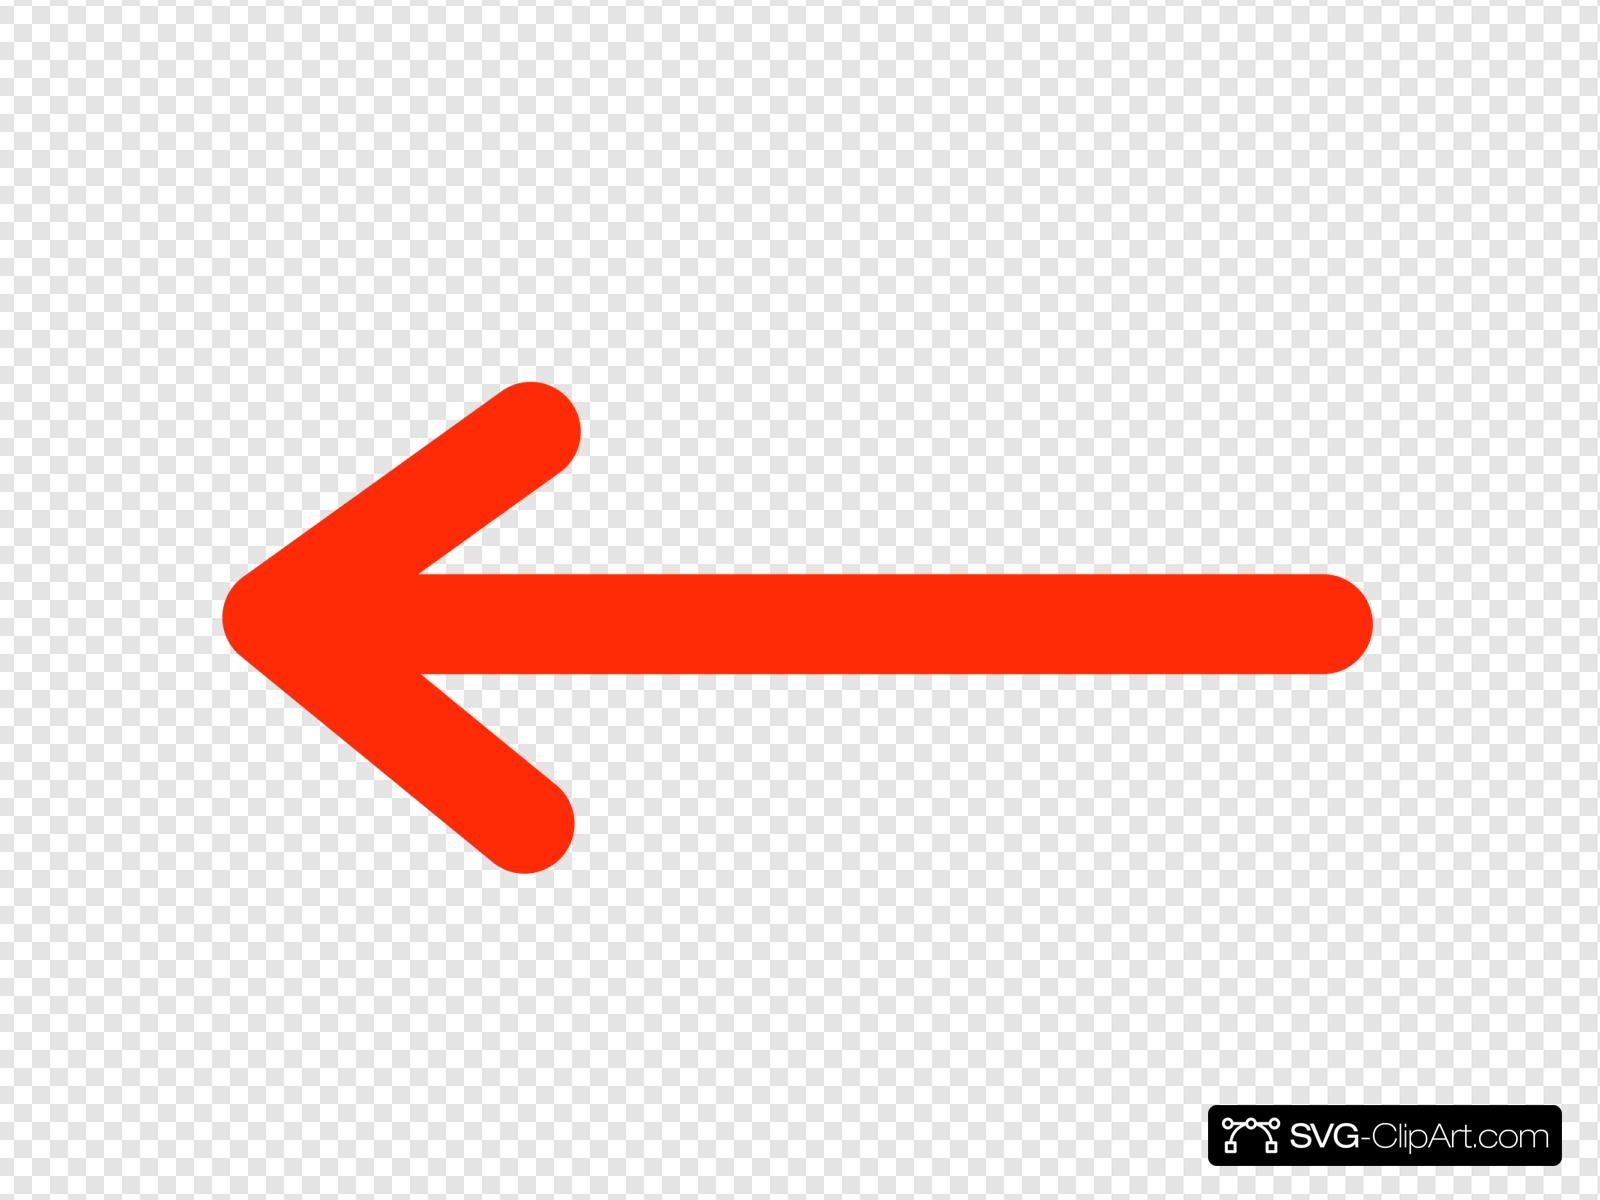 Red Arrow Clip art, Icon and SVG.